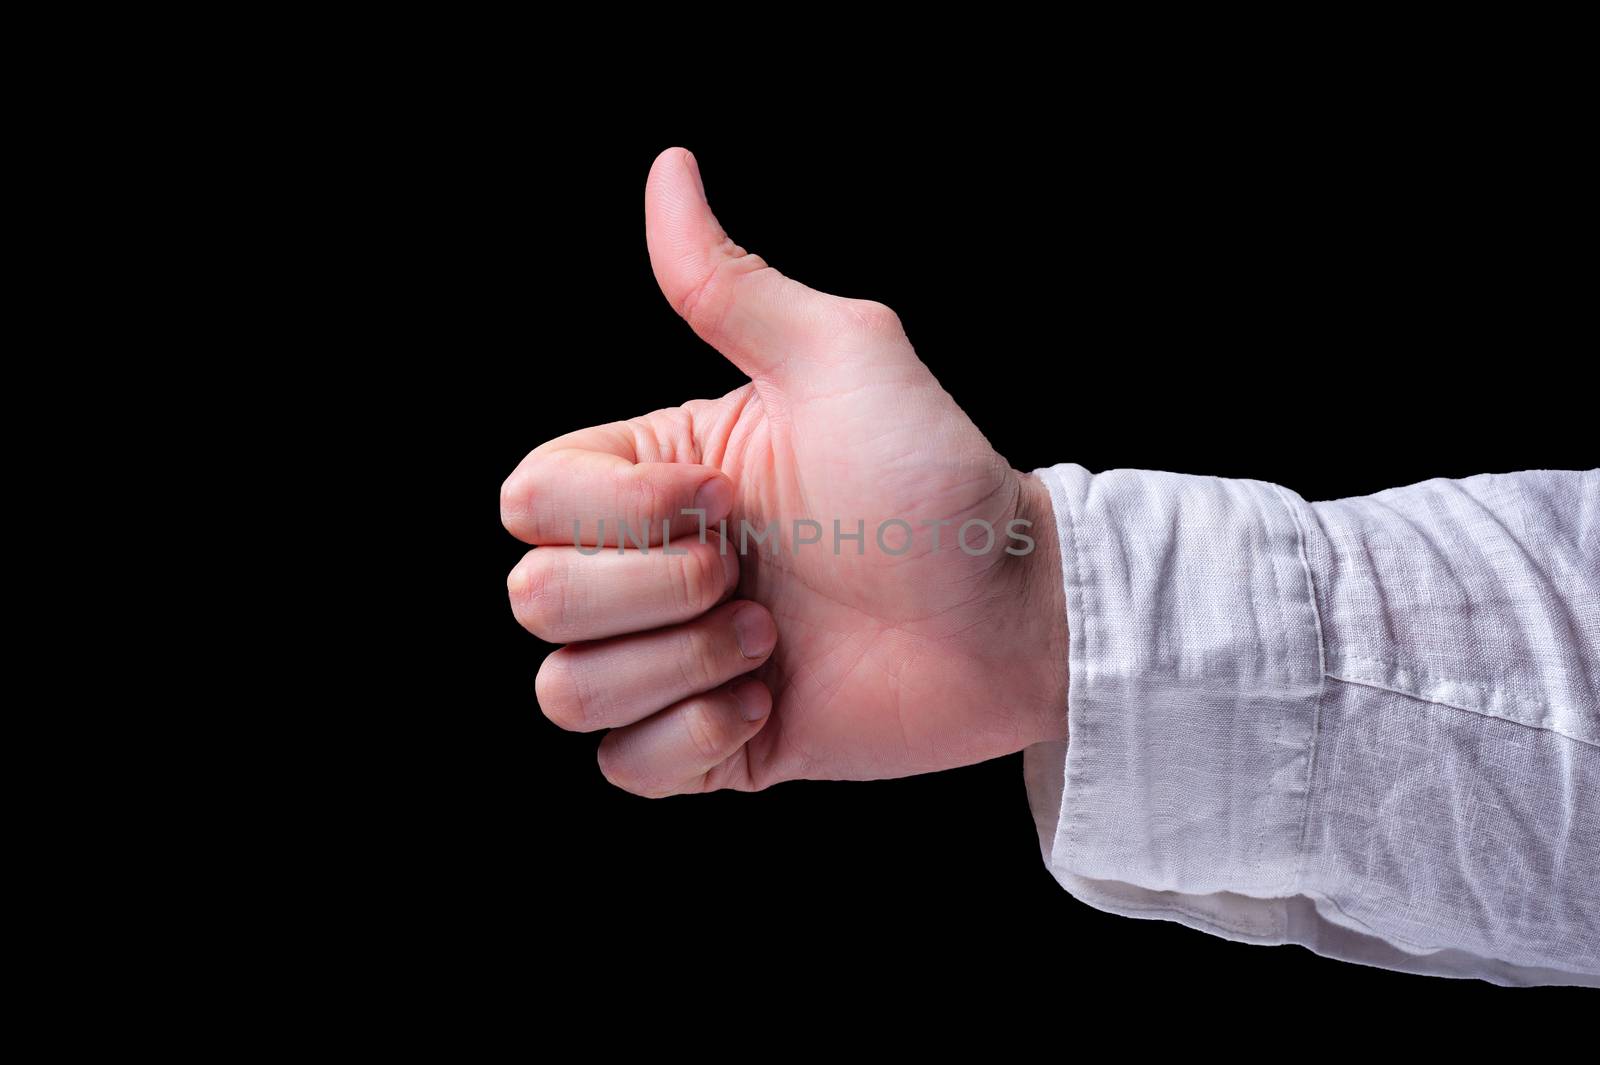 The human hand in a white shirt shows thumb signal, usually described as a thumbs-up sign on isolated black background